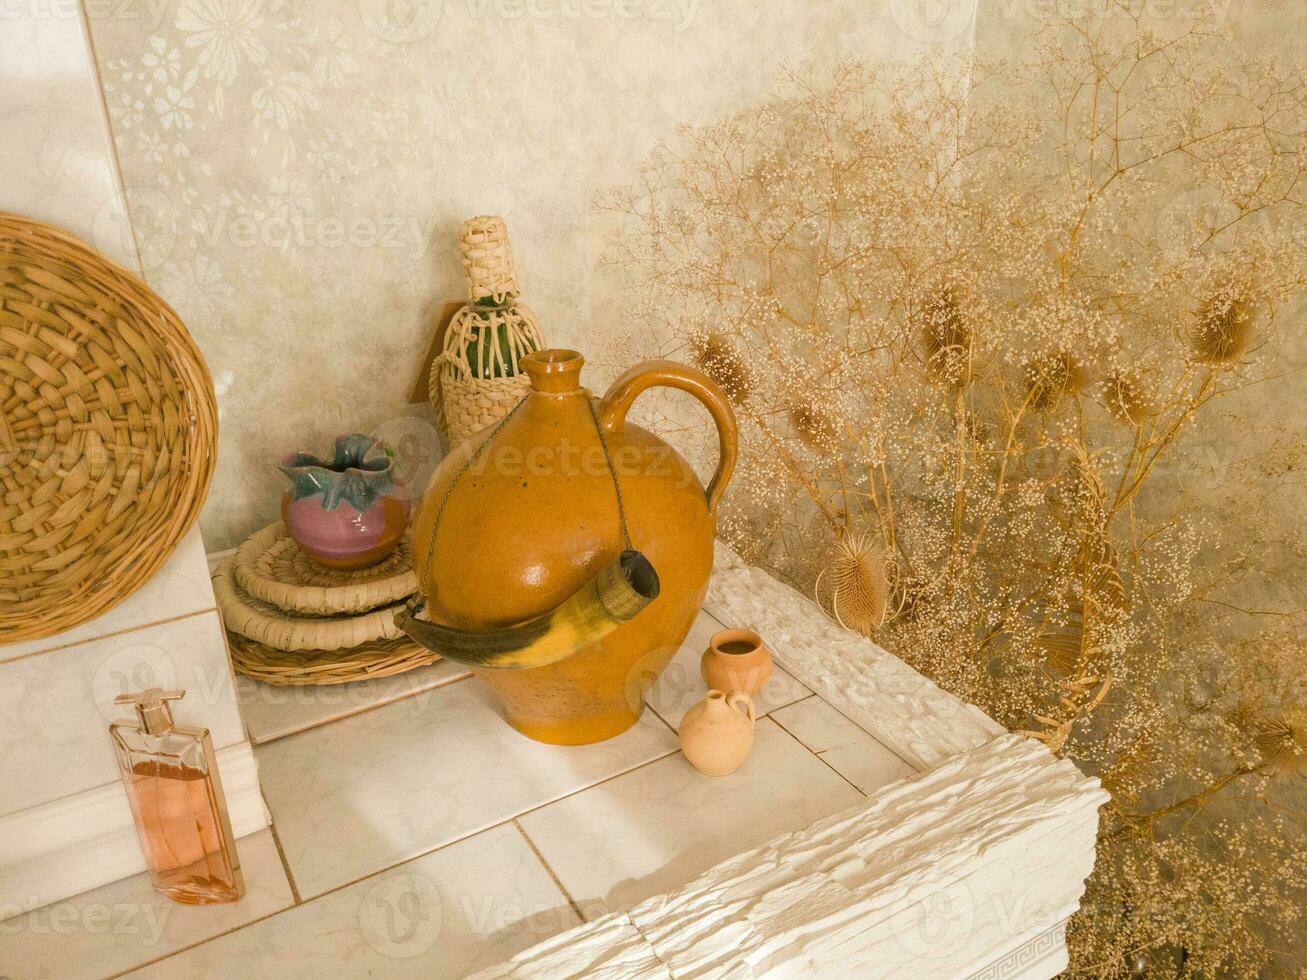 Shot of the old fashioned decoration items in the house. Concept photo